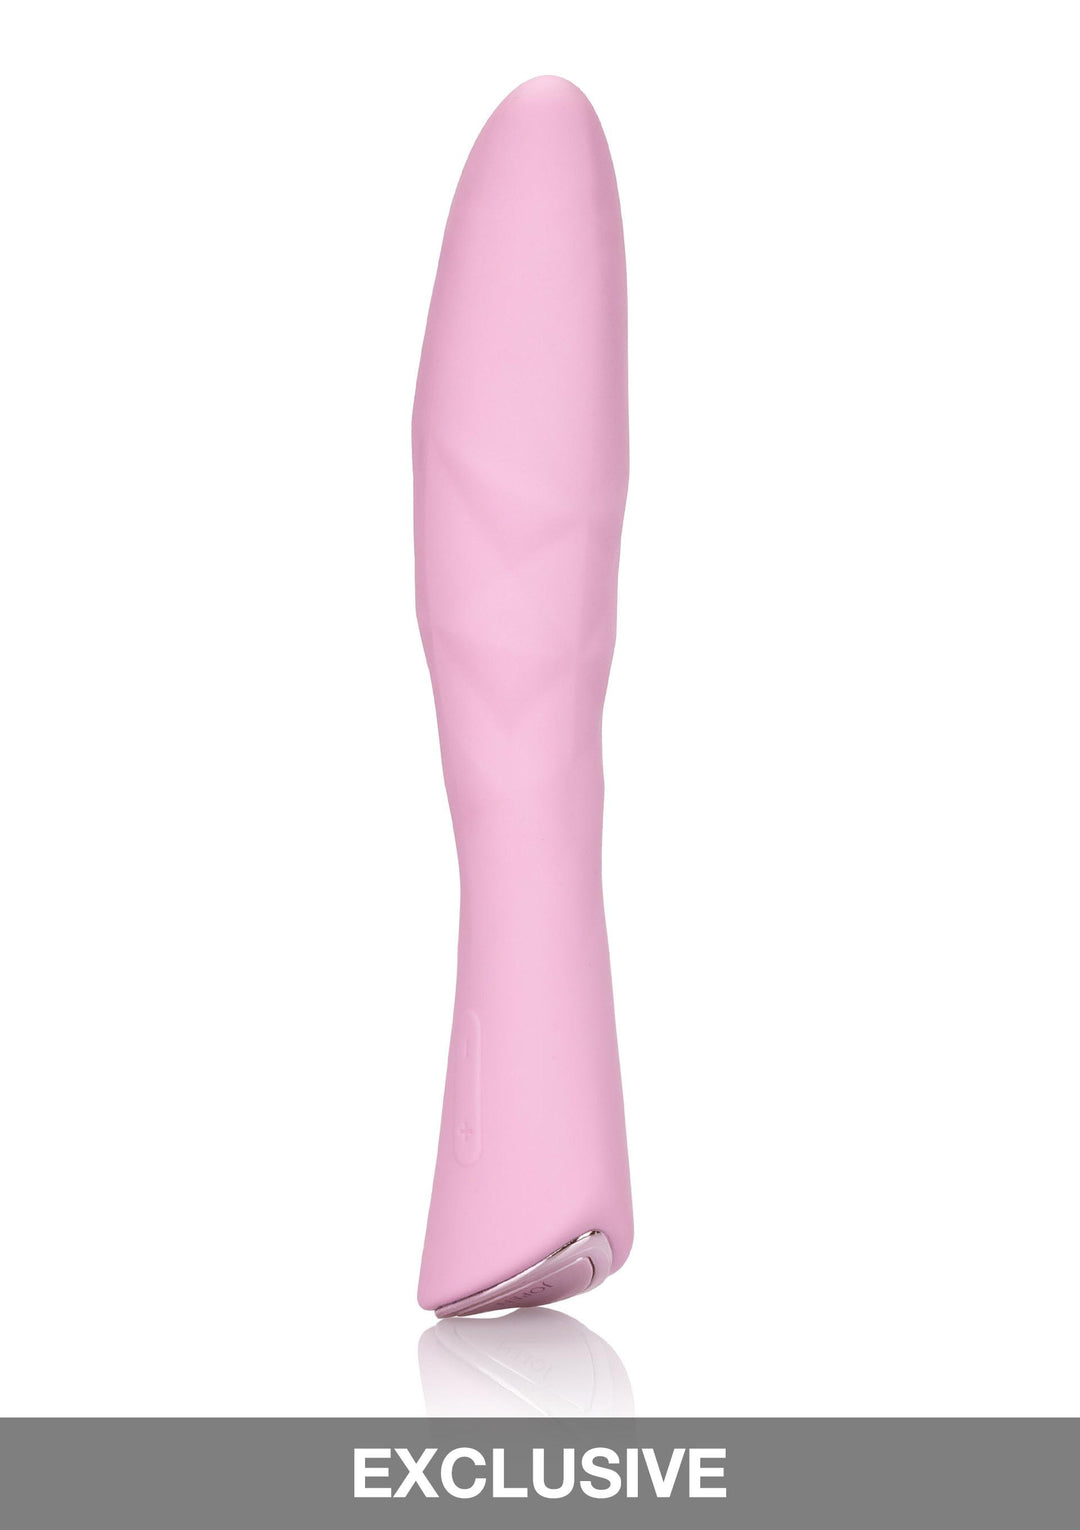 Amour Silicone Wand rechargeable vaginal vibrator